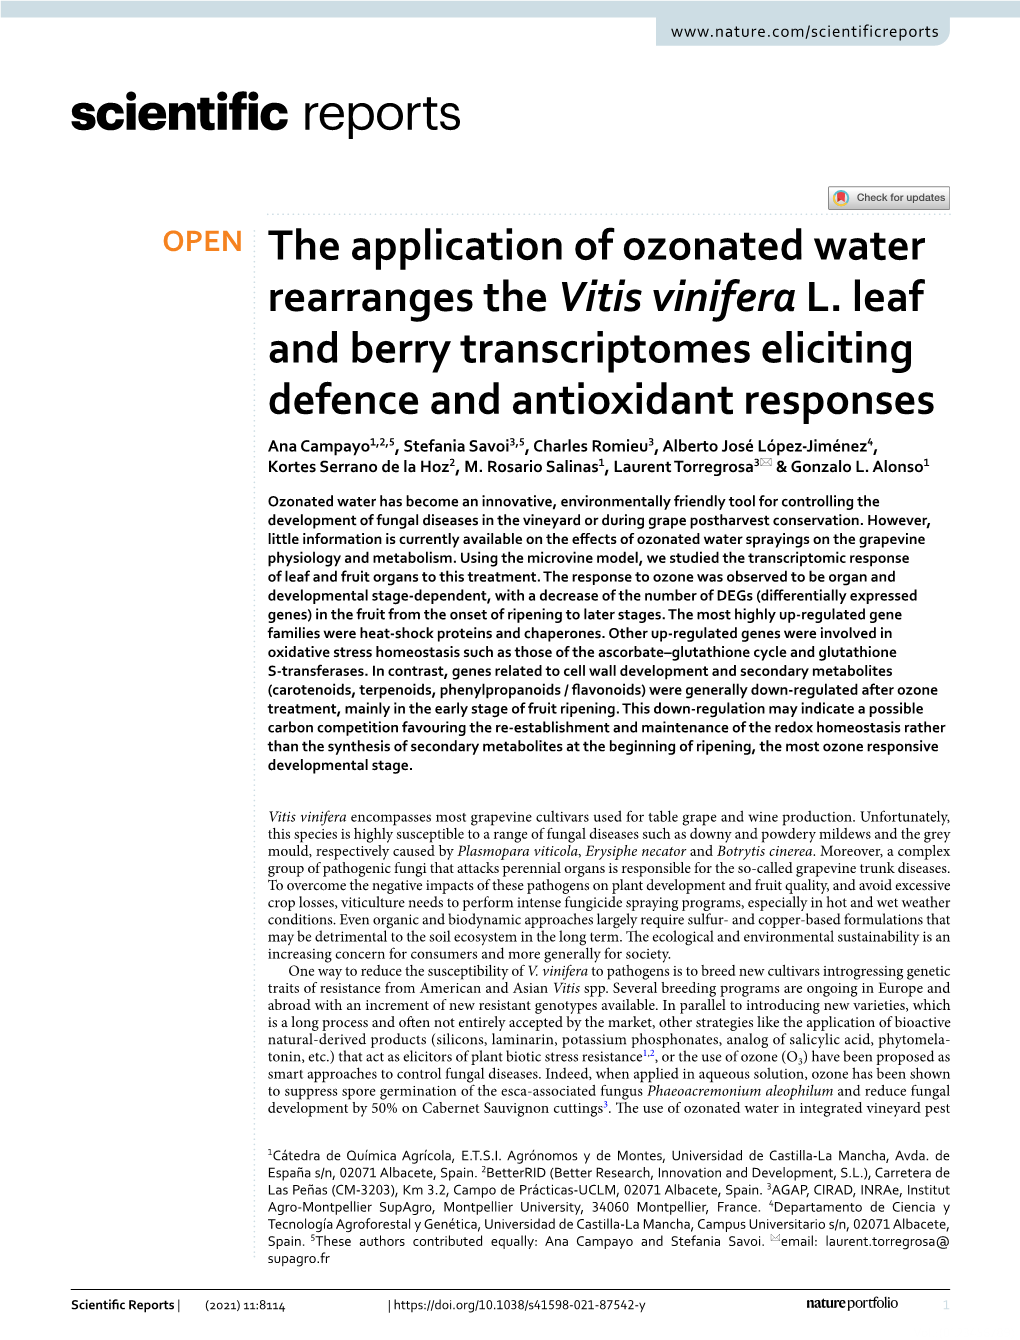 The Application of Ozonated Water Rearranges the Vitis Vinifera L. Leaf and Berry Transcriptomes Eliciting Defence and Antioxida